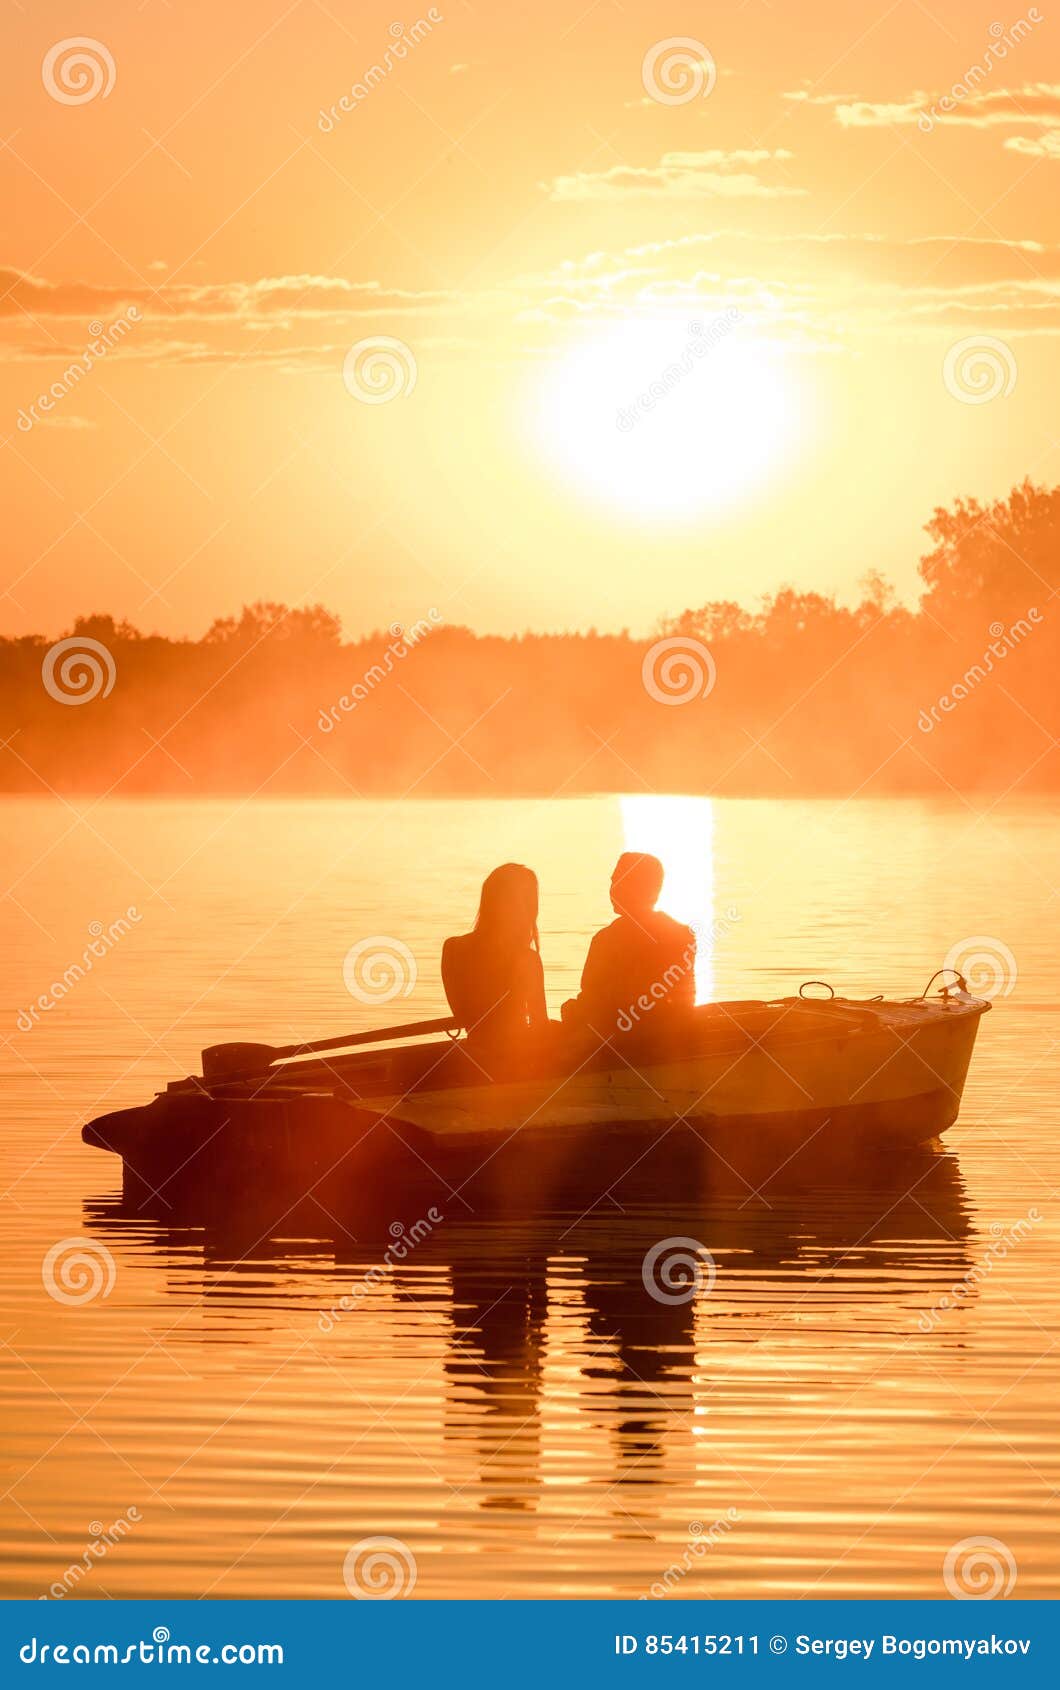 Couple In Love Silhouette At Lake Sunset Royalty-Free ...